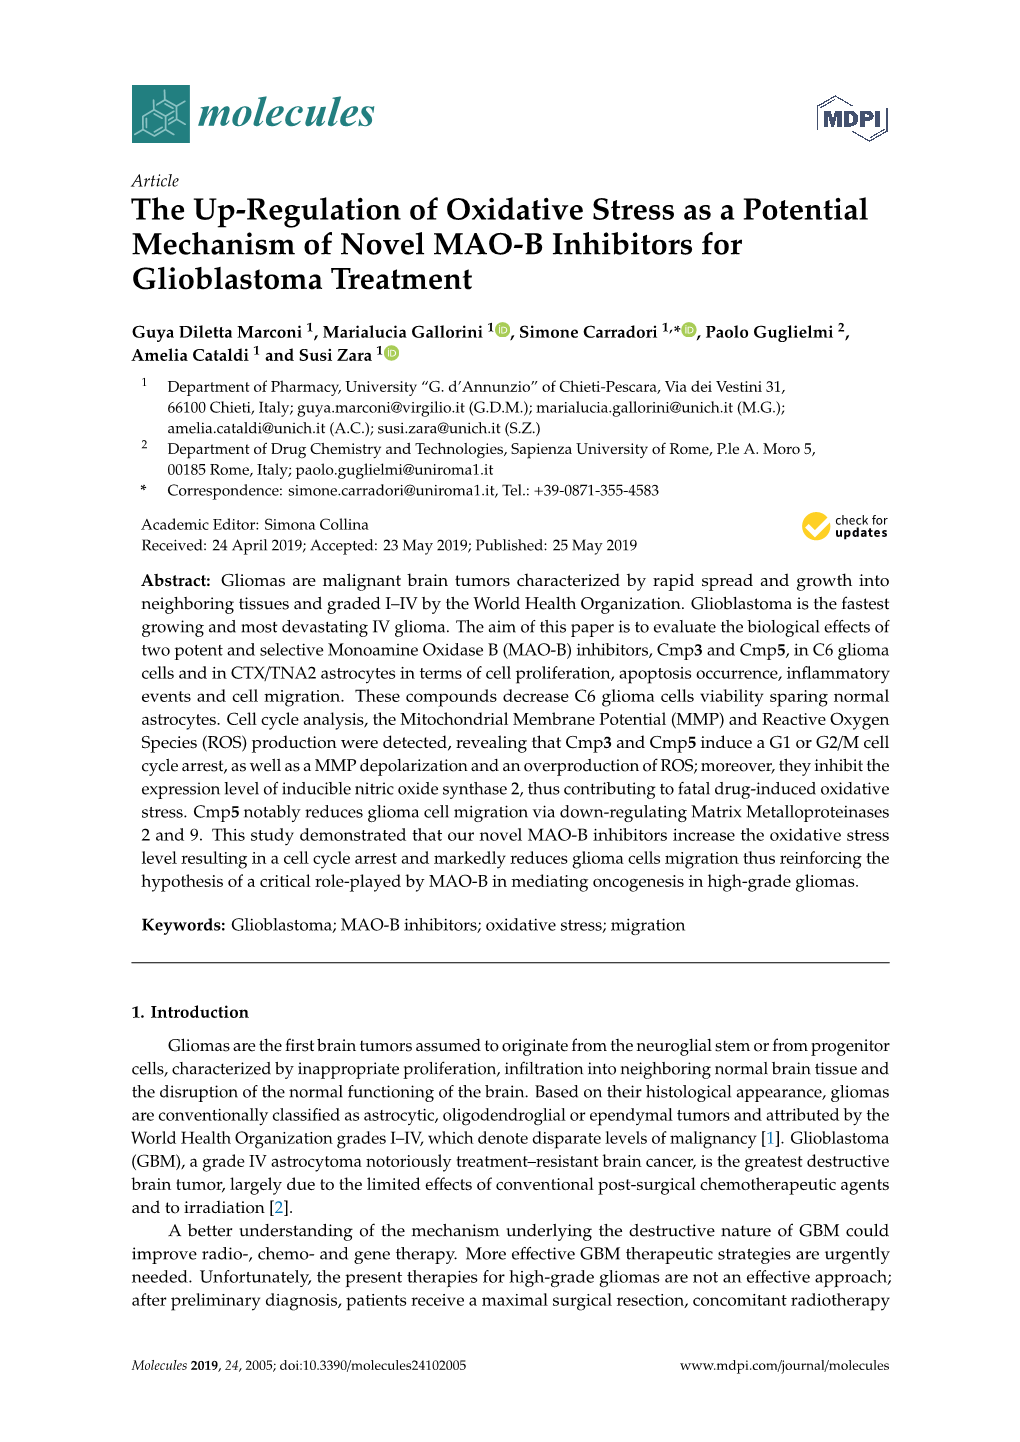 The Up-Regulation of Oxidative Stress As a Potential Mechanism of Novel MAO-B Inhibitors for Glioblastoma Treatment